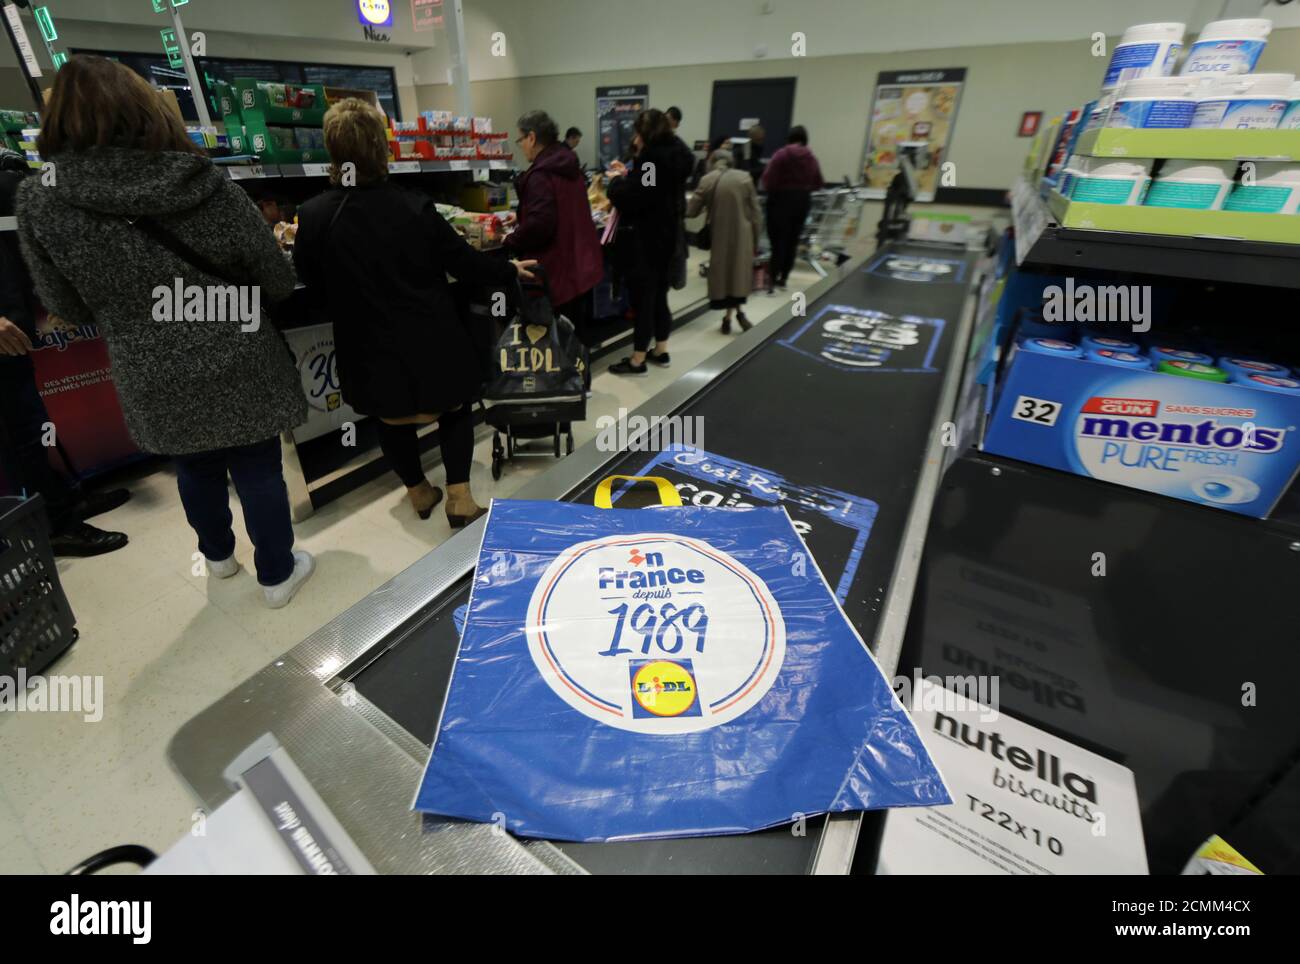 Customers wait cashes in a Lidl supermarket in Nice, France, March 2, 2020. REUTERS/Eric Gaillard Stock Photo - Alamy